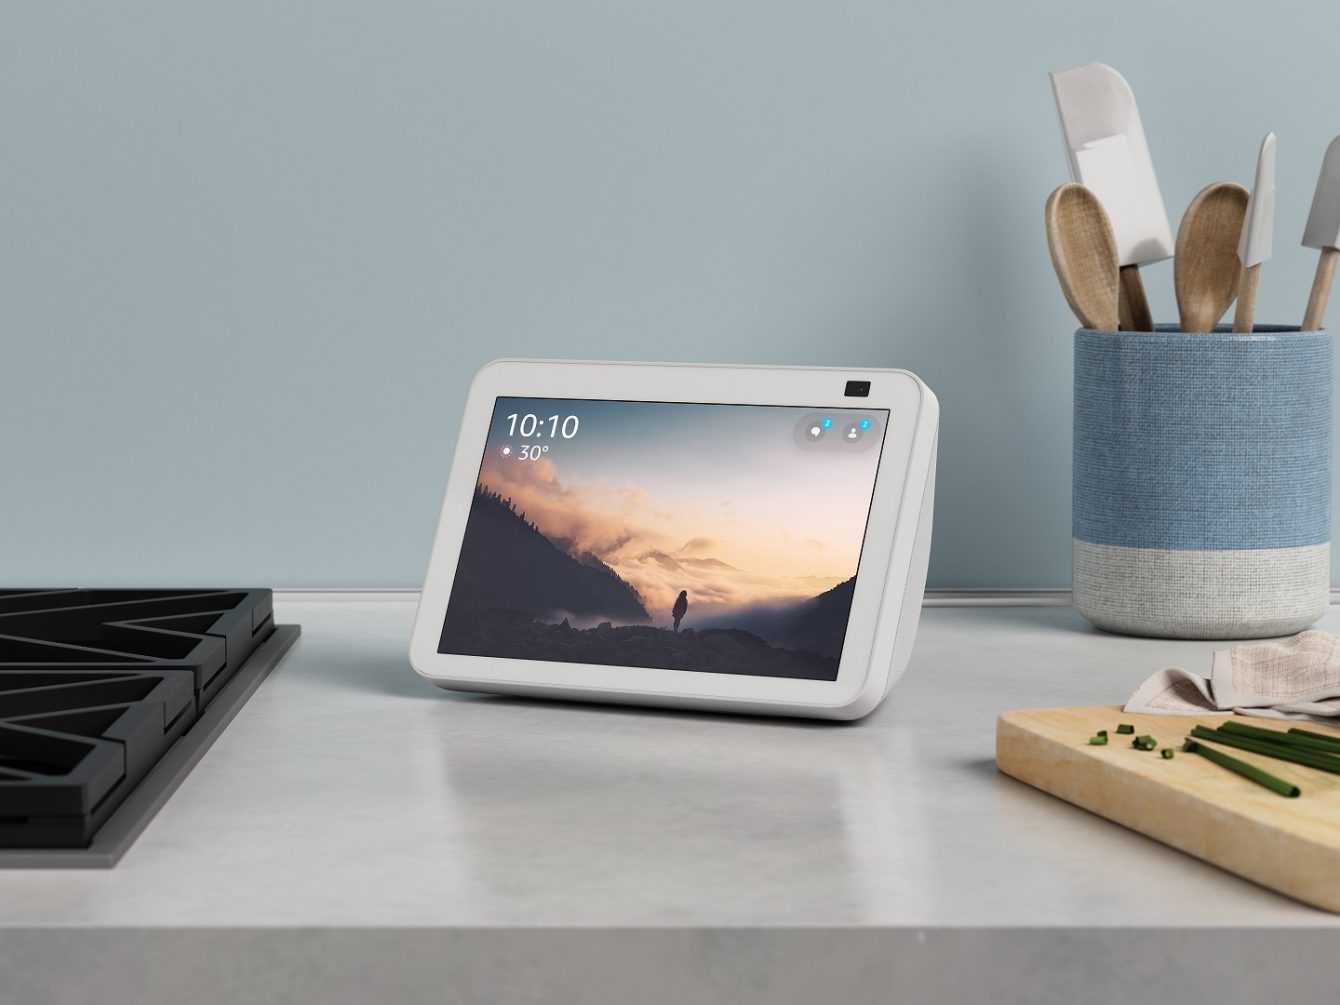 Amazon: presented the new Echo Show 8 and 5